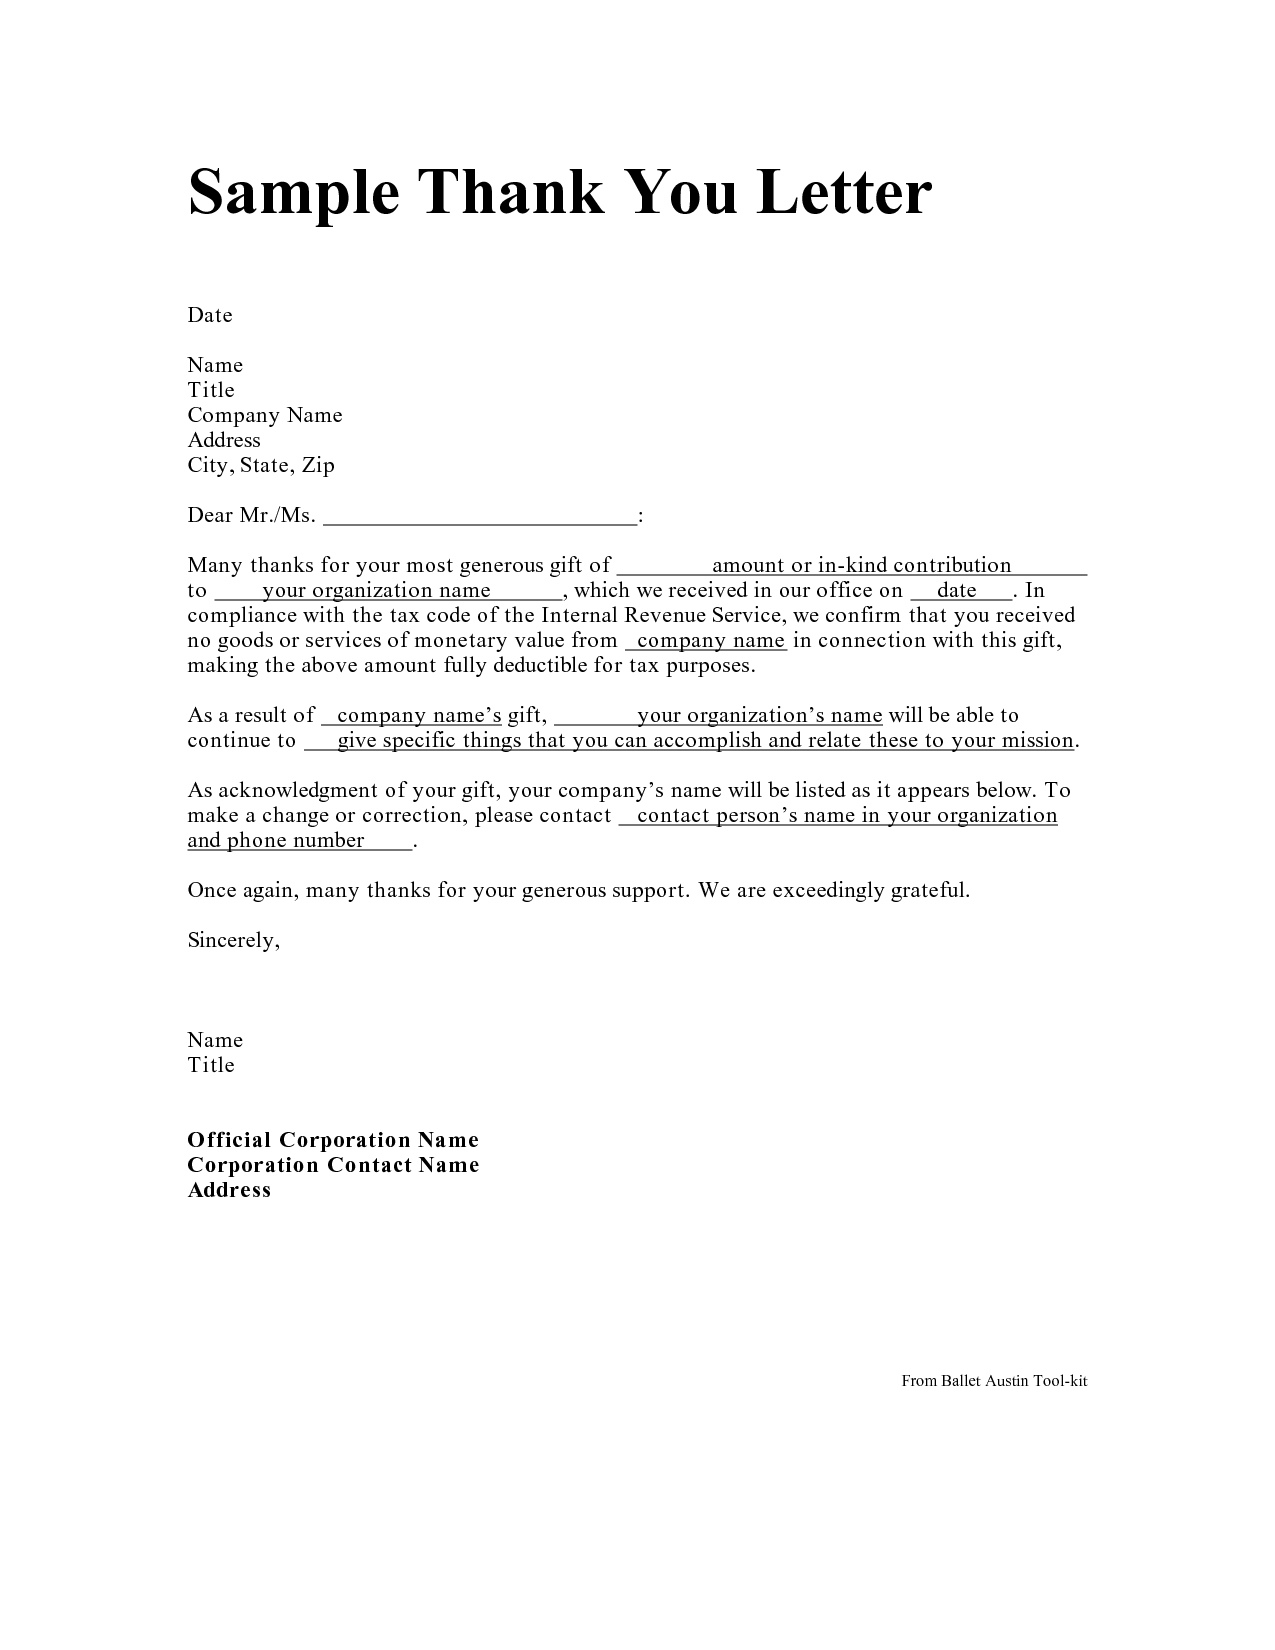 Business Valuation Engagement Letter Template - Personal Thank You Letter Personal Thank You Letter Samples